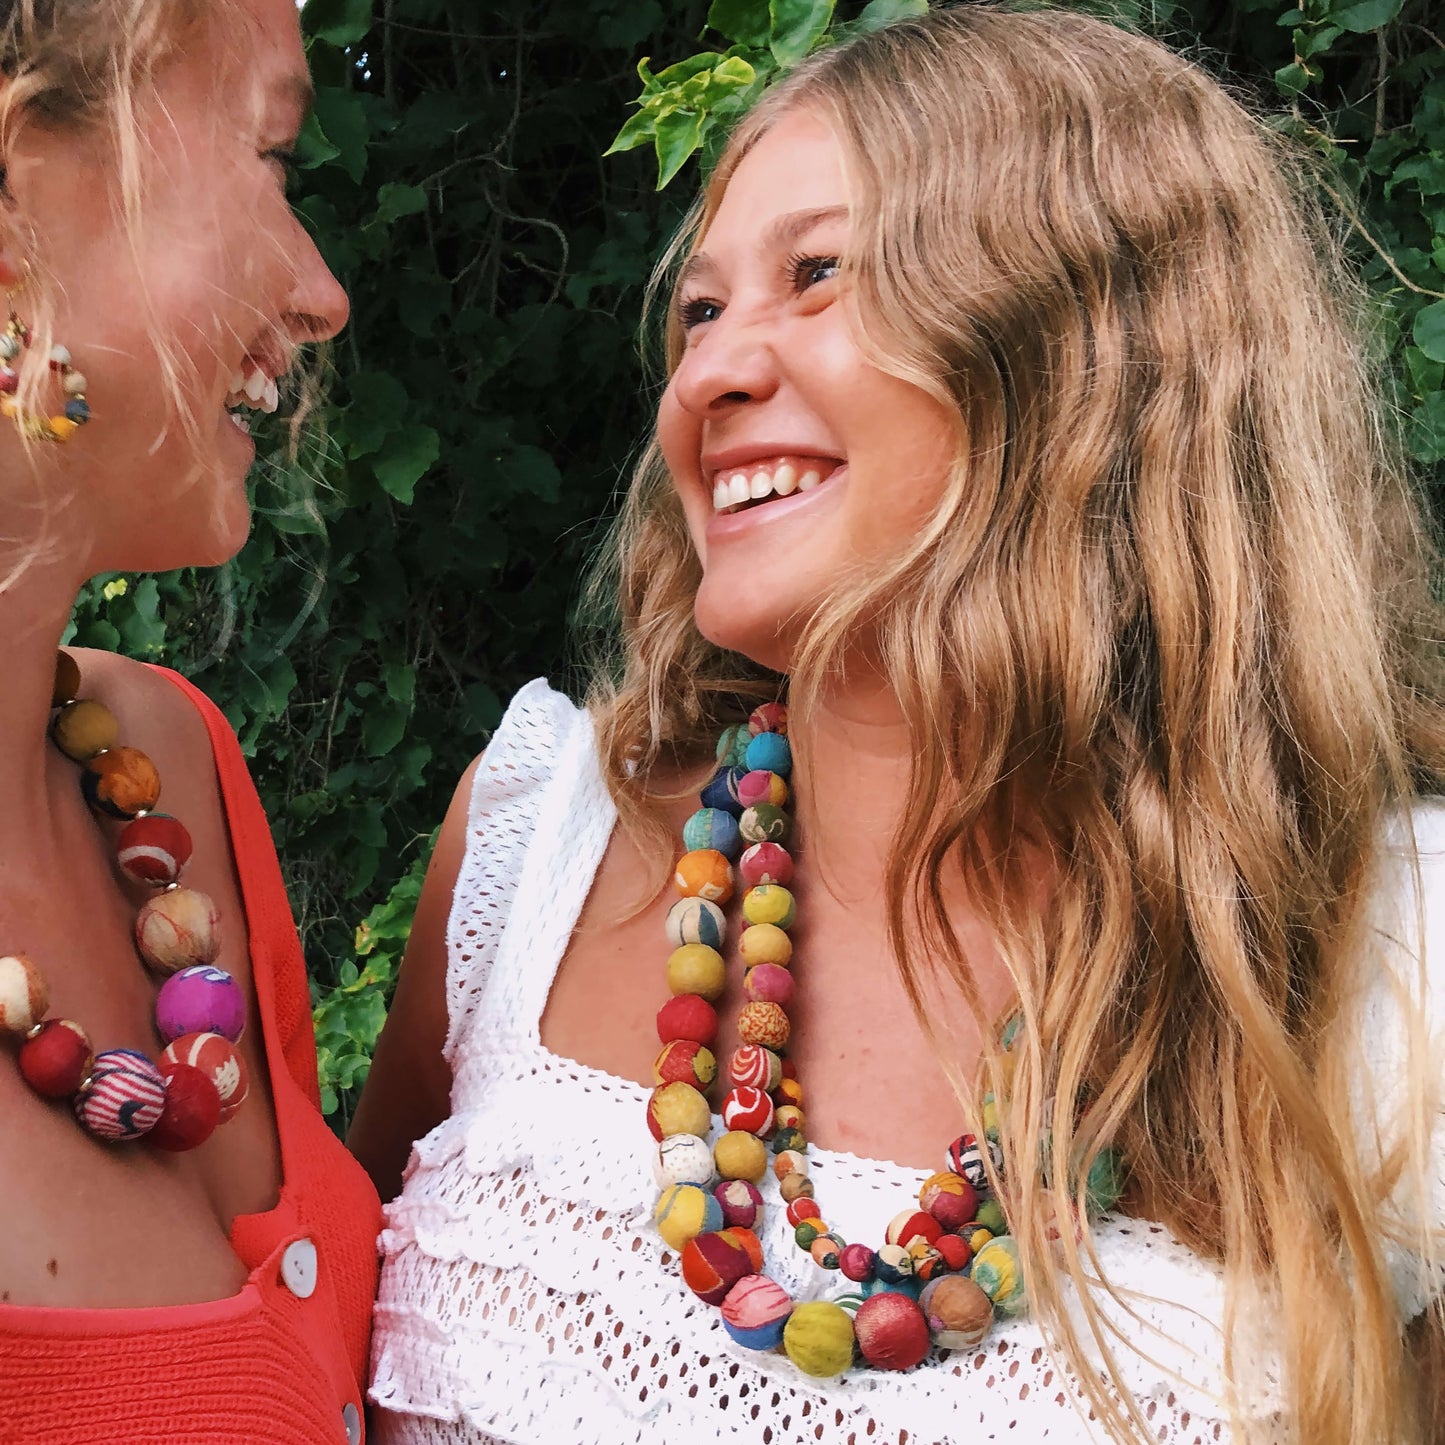 A girl looks at her friends and laughs while wearing the Kantha Calypso Necklace.